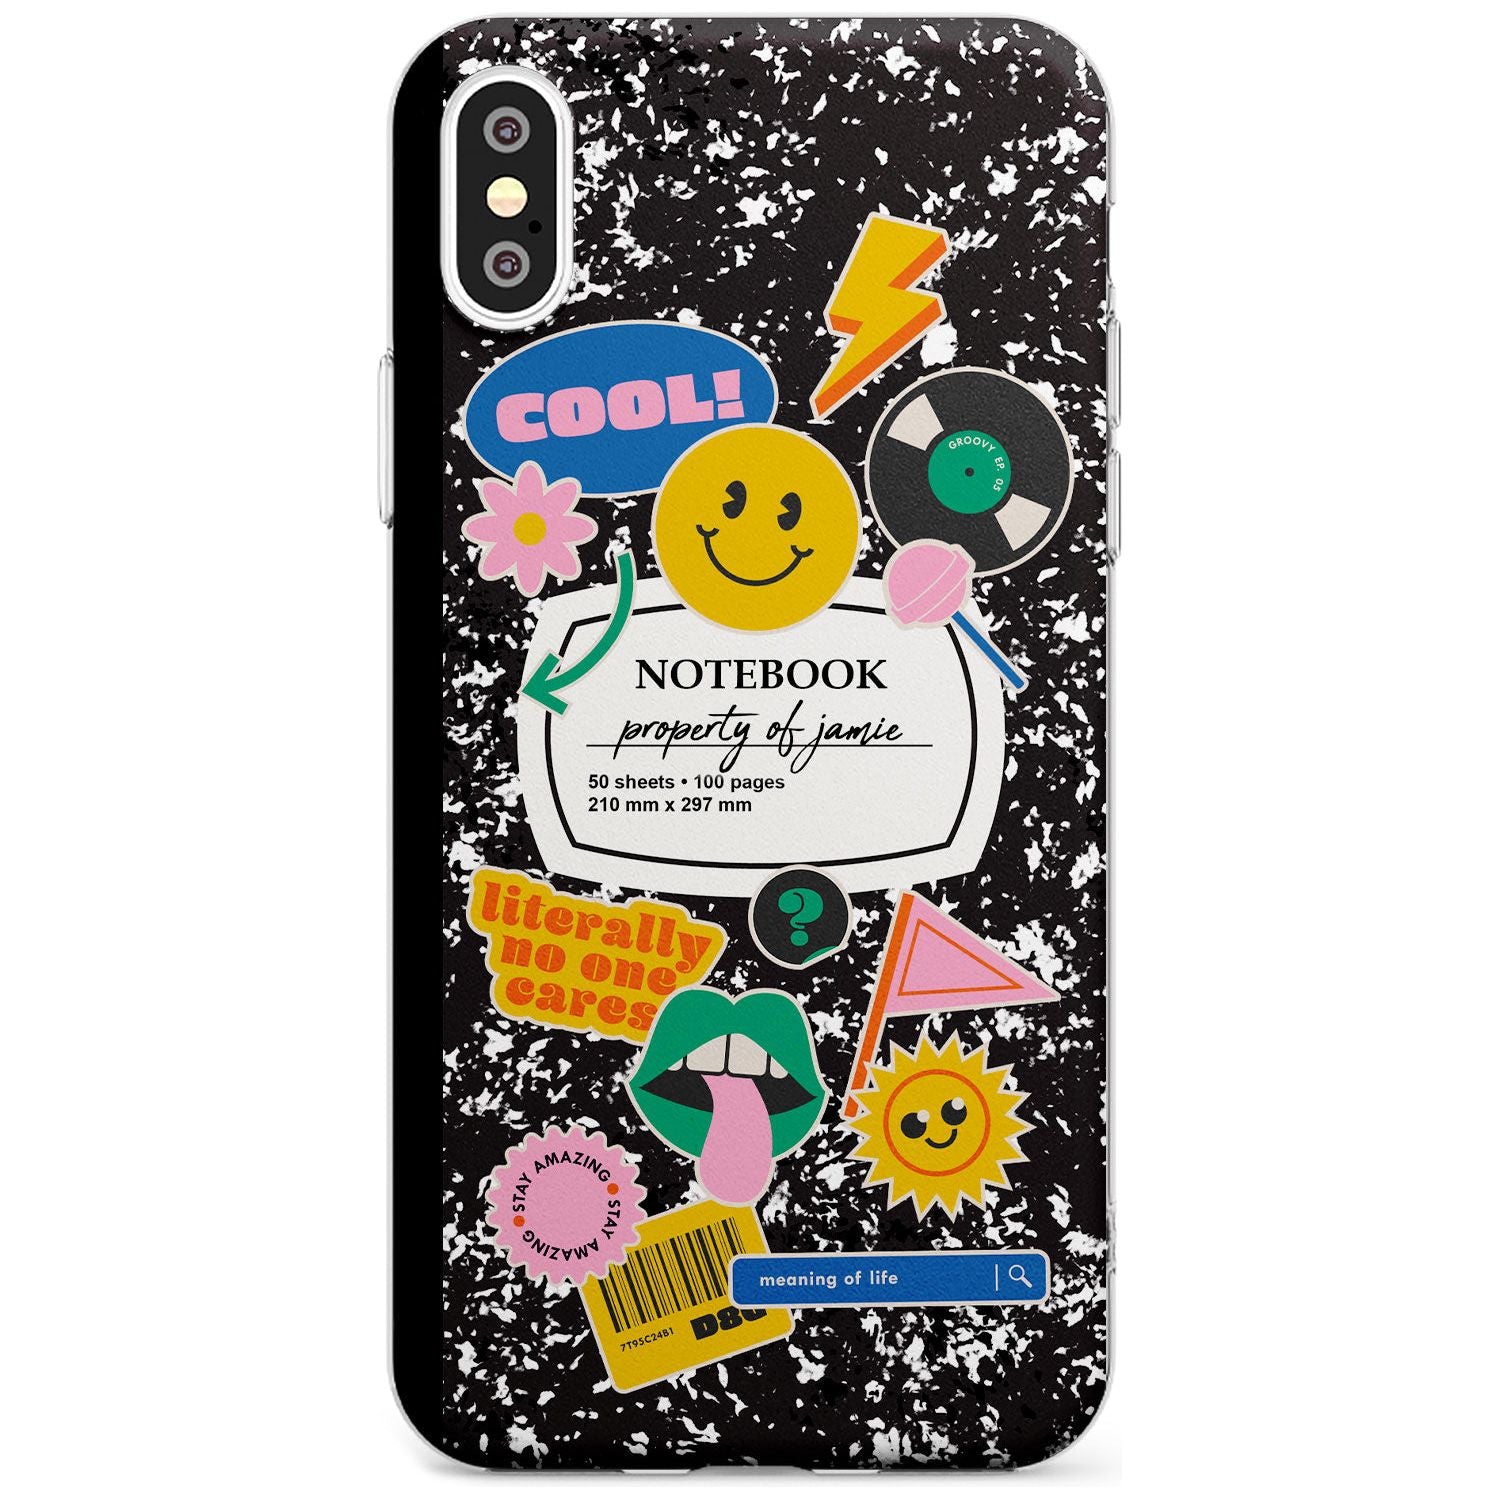 Custom Notebook Cover with Stickers Black Impact Phone Case for iPhone X XS Max XR